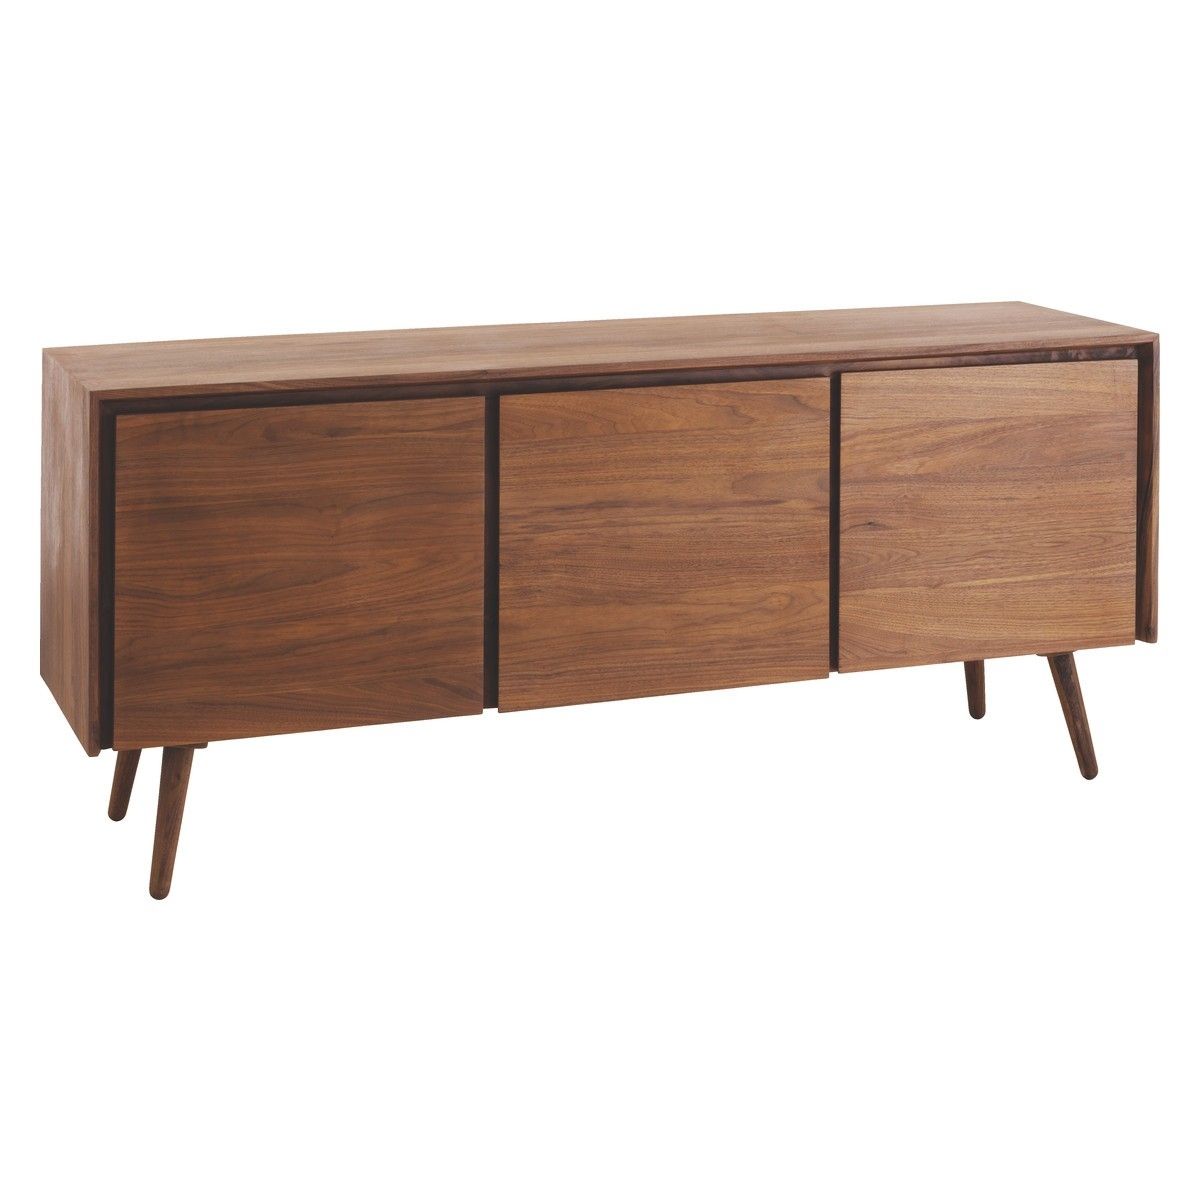 Vince Walnut 3 Door Mid Century Sideboard | Buy Now At Habitat Uk Intended For Current Walnut Small Sideboards (Photo 11 of 20)